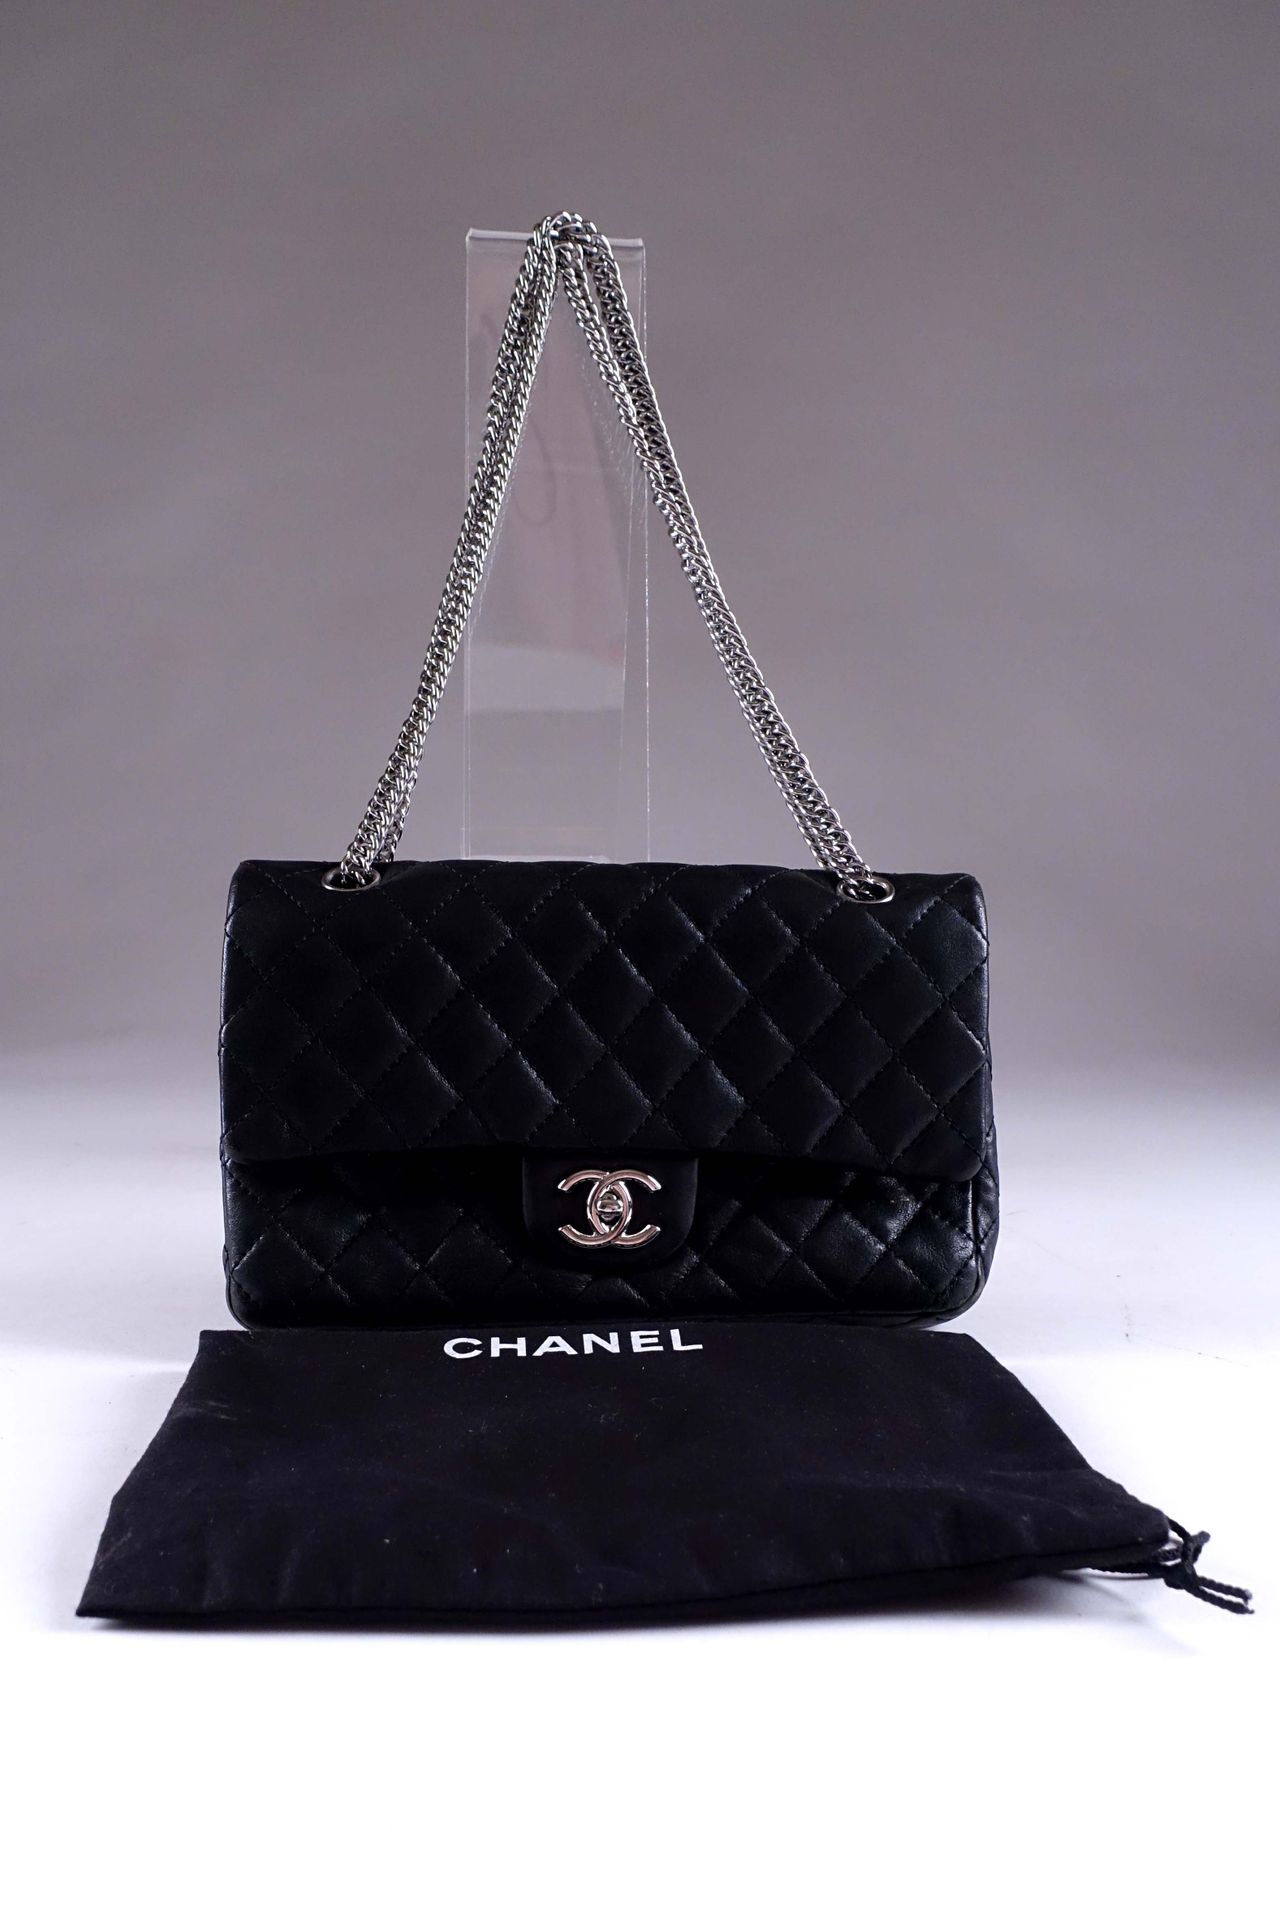 chanel small gift bags